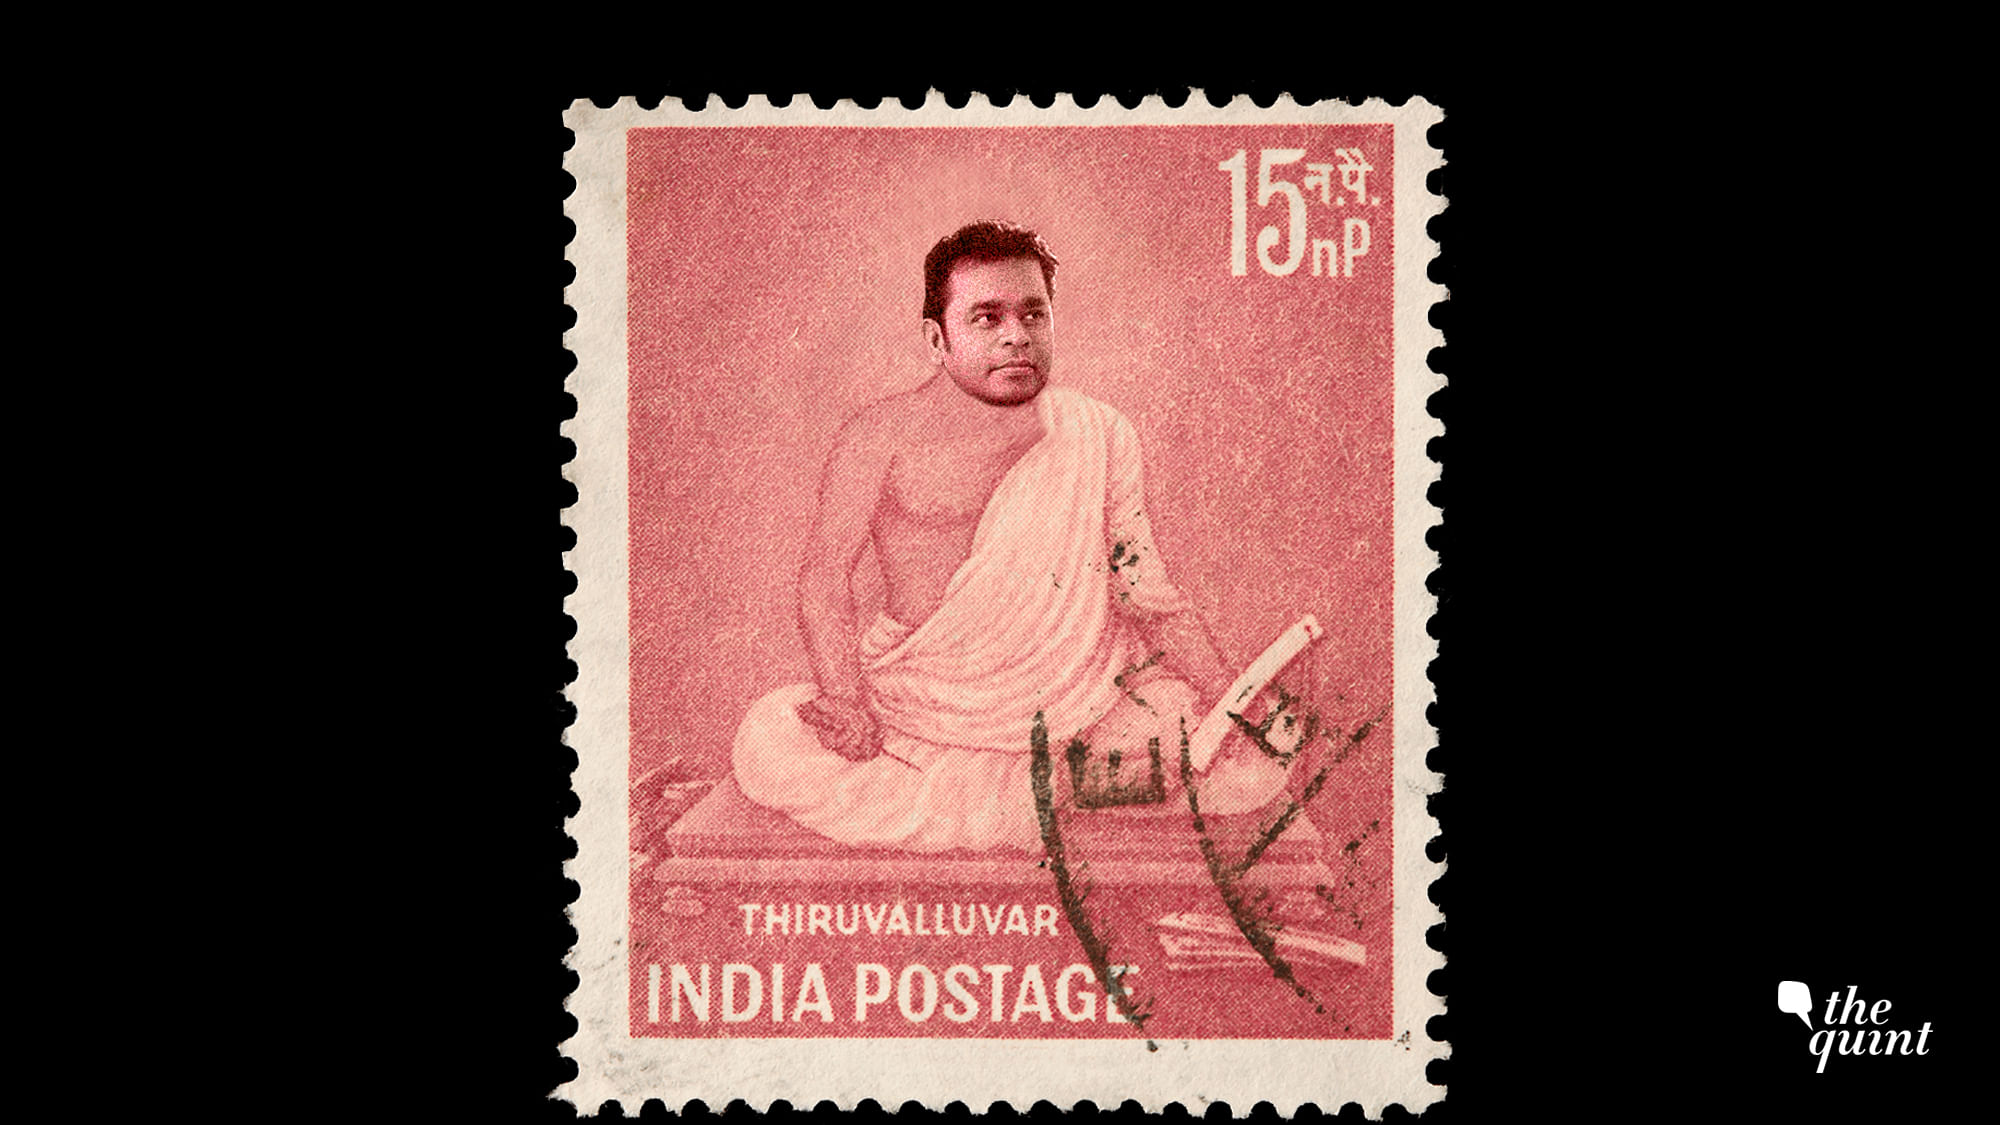 AR Rahman is set to become the patron Saint of Tamil. At least, on Twitter.